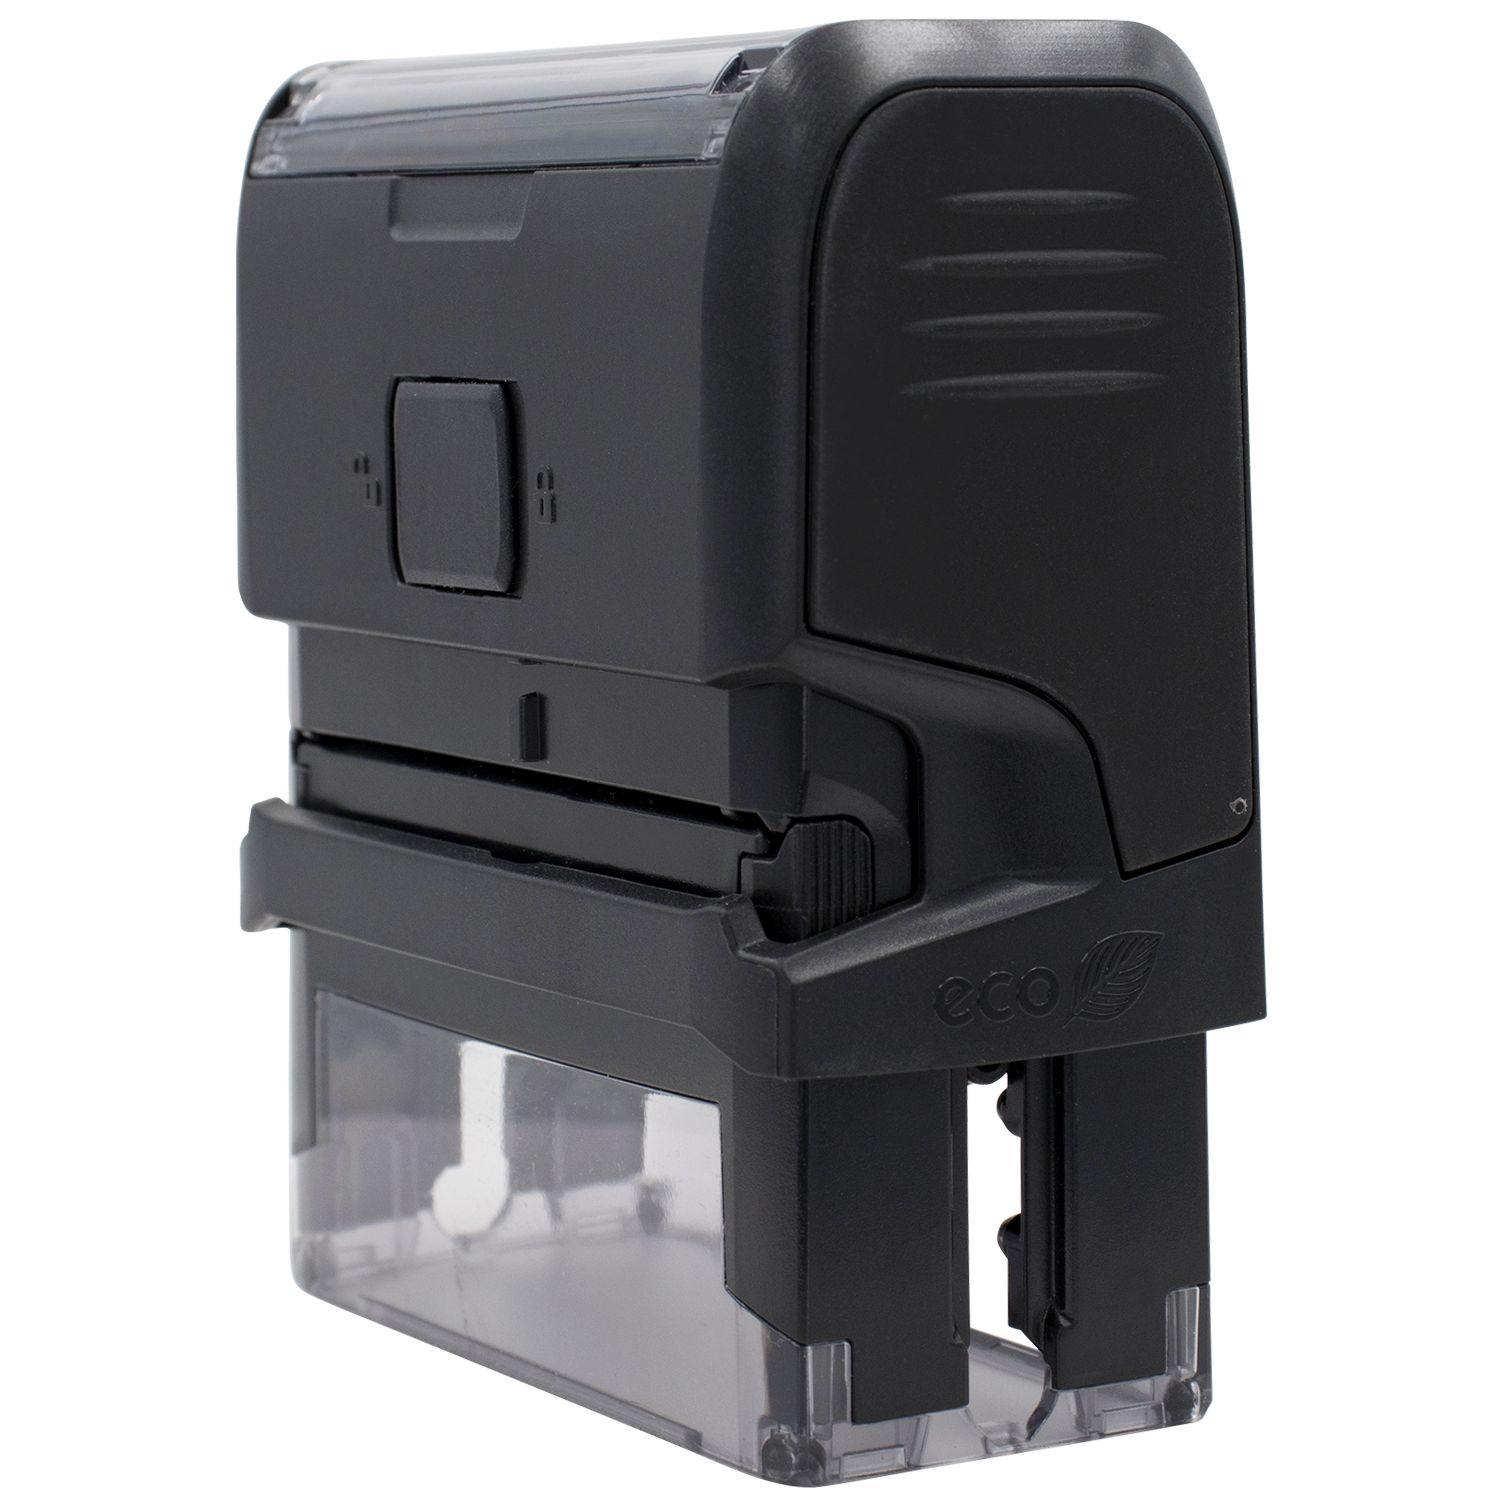 Self-Inking Shadow Copy Stamp - Engineer Seal Stamps - Brand_Trodat, Impression Size_Small, Stamp Type_Self-Inking Stamp, Type of Use_General, Type of Use_Office